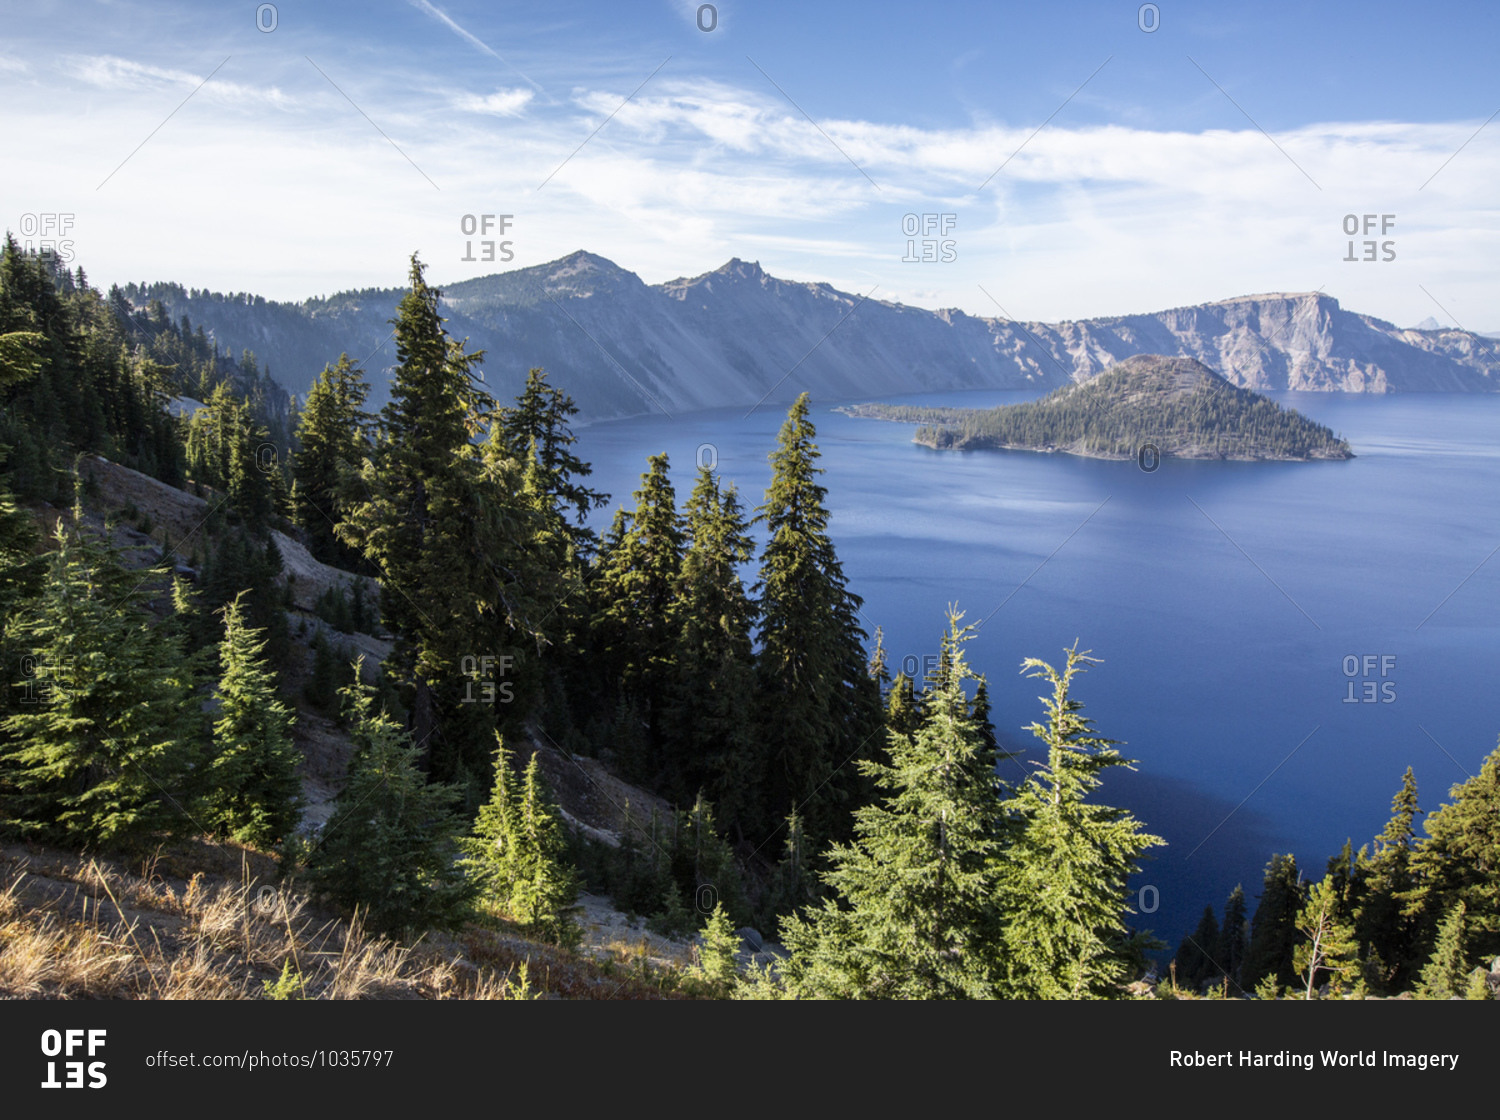 Wizard Island in Crater Lake, the deepest lake in the United States, Crater Lake National Park, Oregon, United States of America, North America